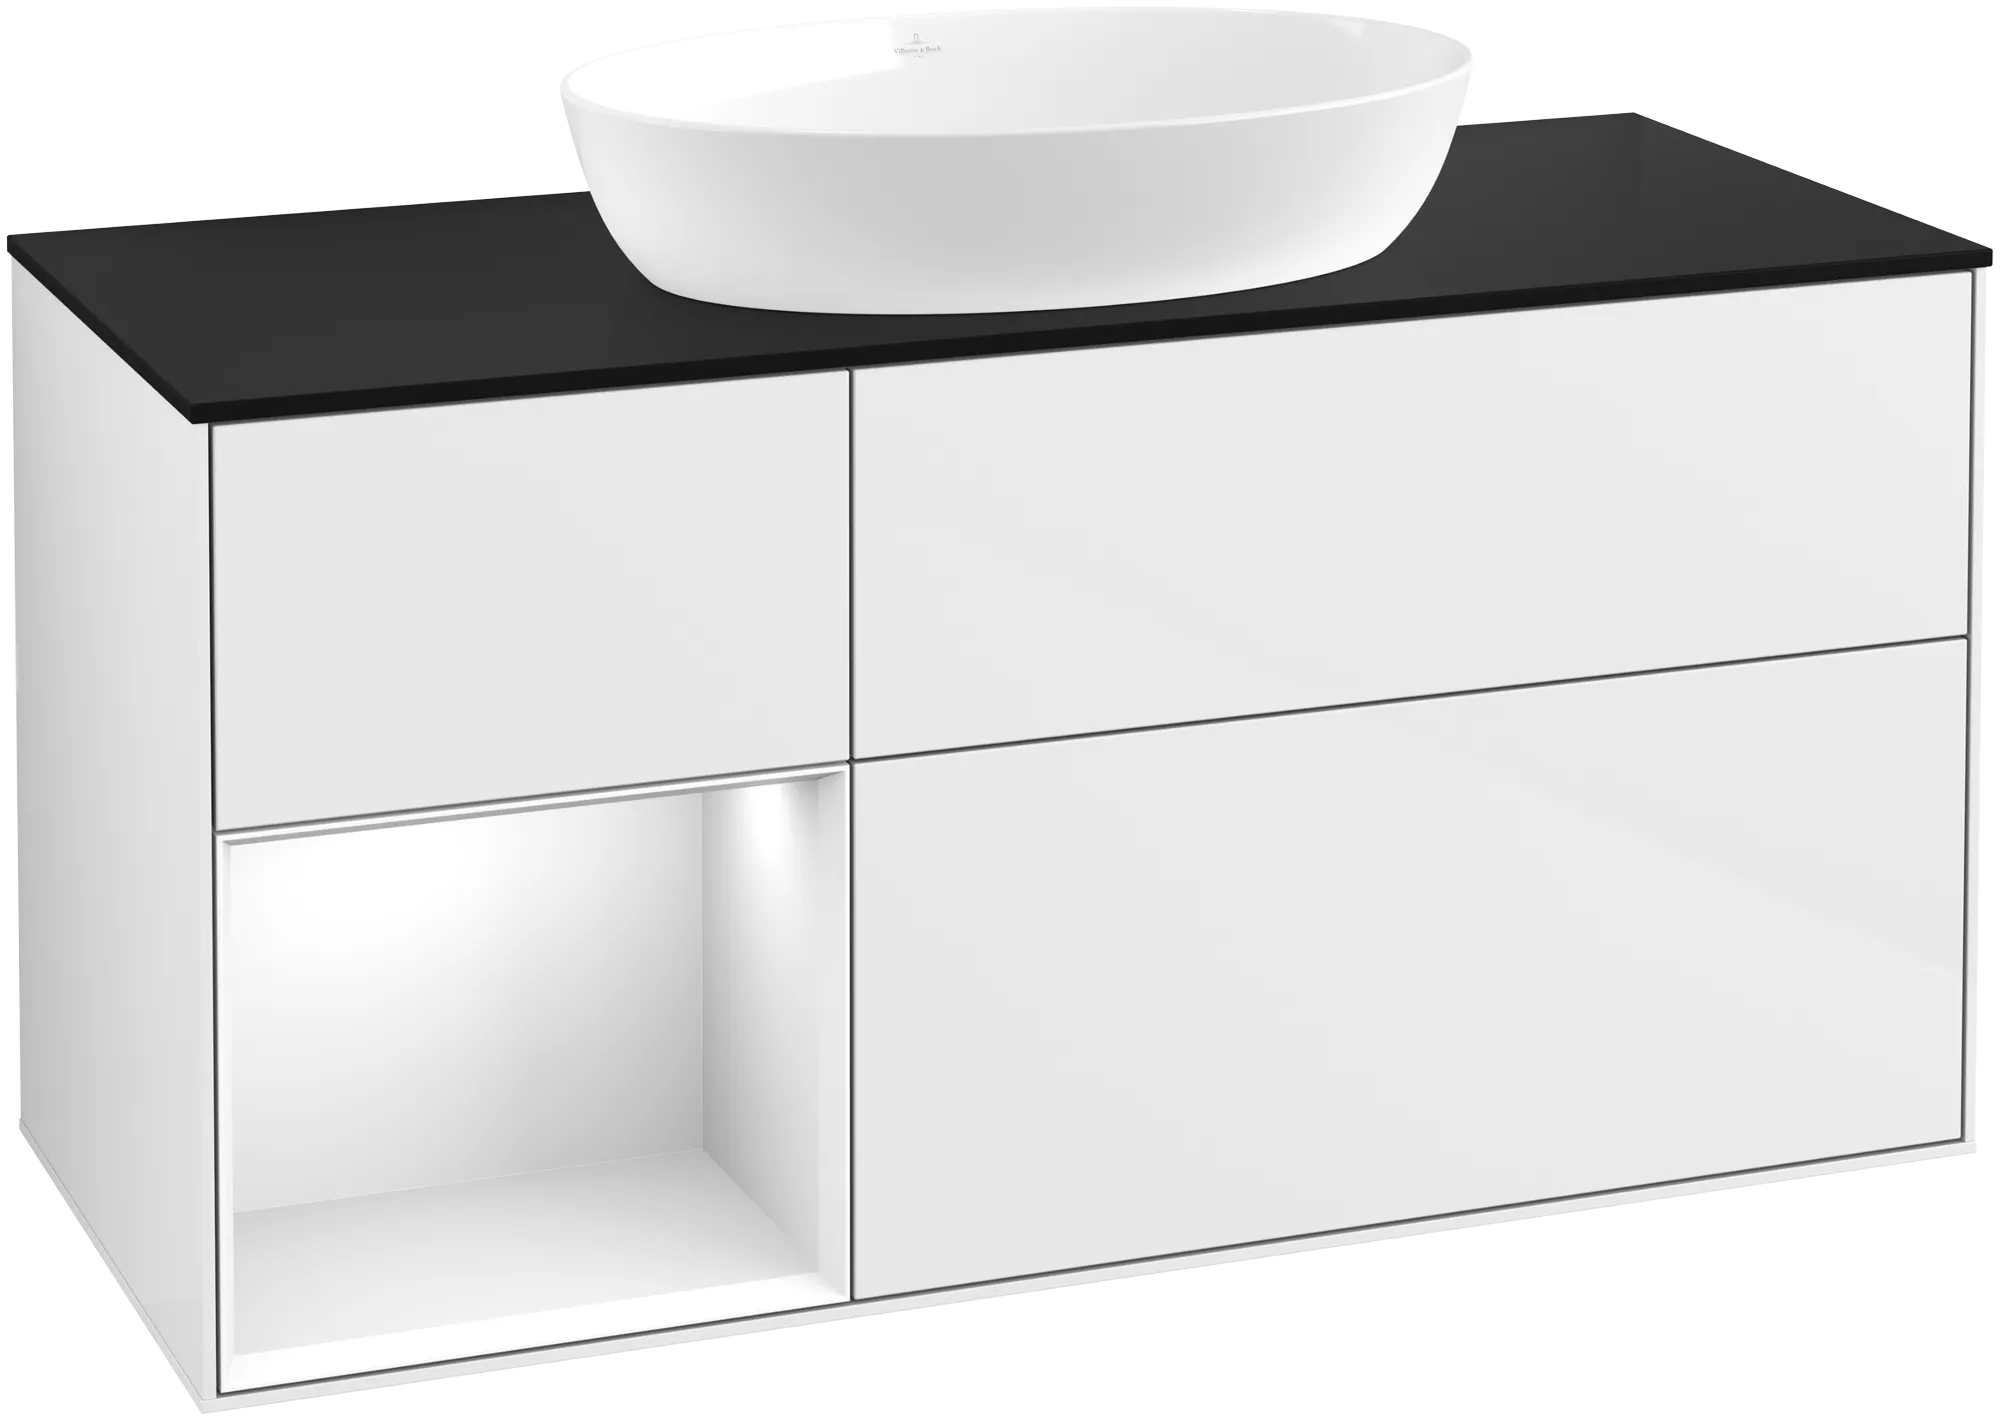 VILLEROY BOCH Finion Vanity unit, with lighting, 3 pull-out compartments, 1200 x 603 x 501 mm, Glossy White Lacquer / Glossy White Lacquer / Glass Black Matt #FA62GFGF resmi